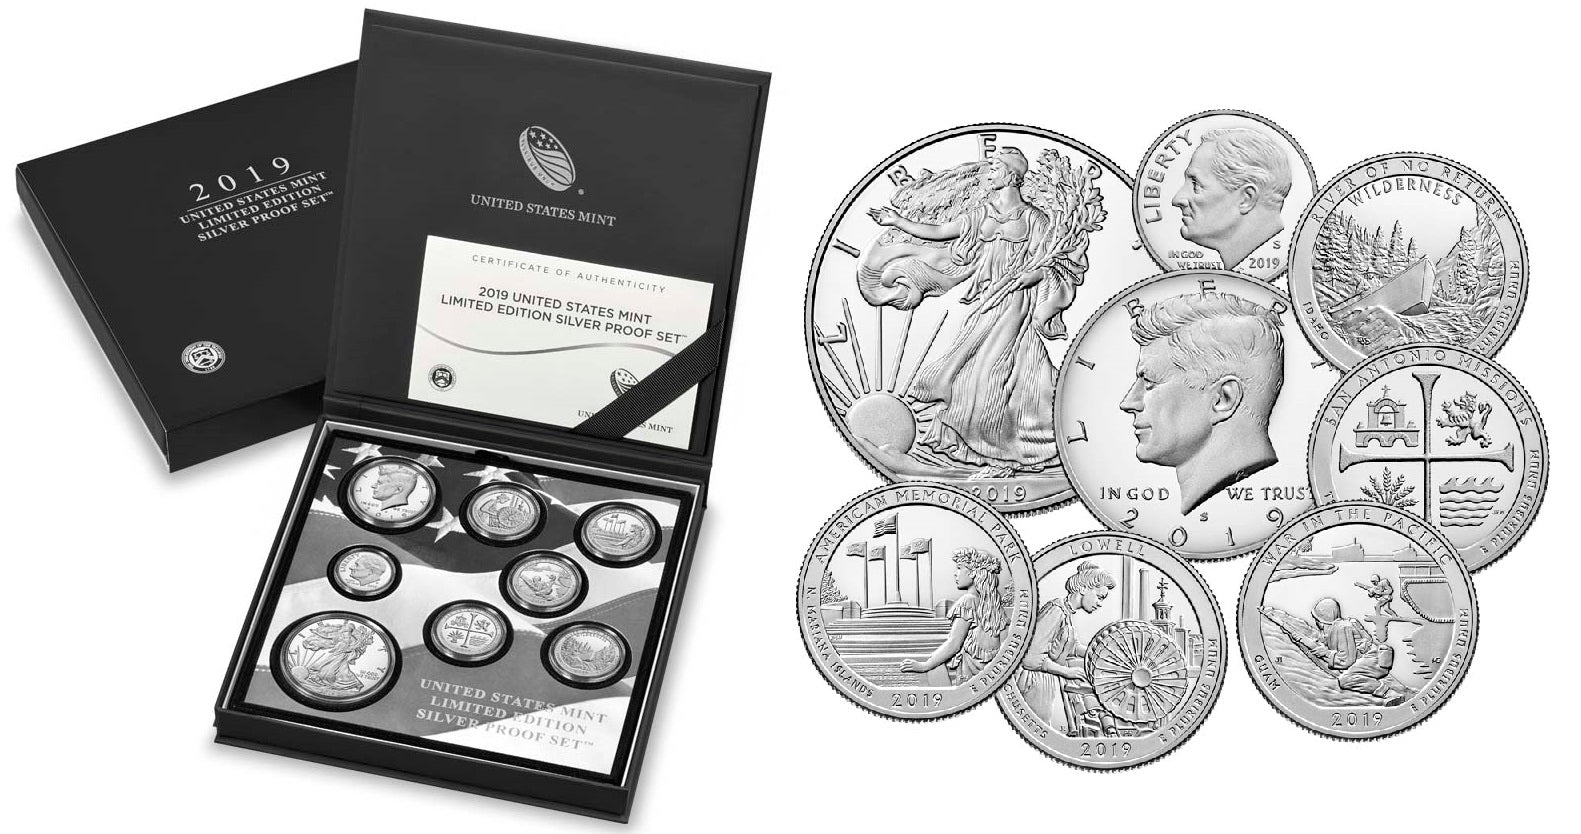 2019 United States Mint Limited Edition Silver Proof Set Captain’s Chest Bullion